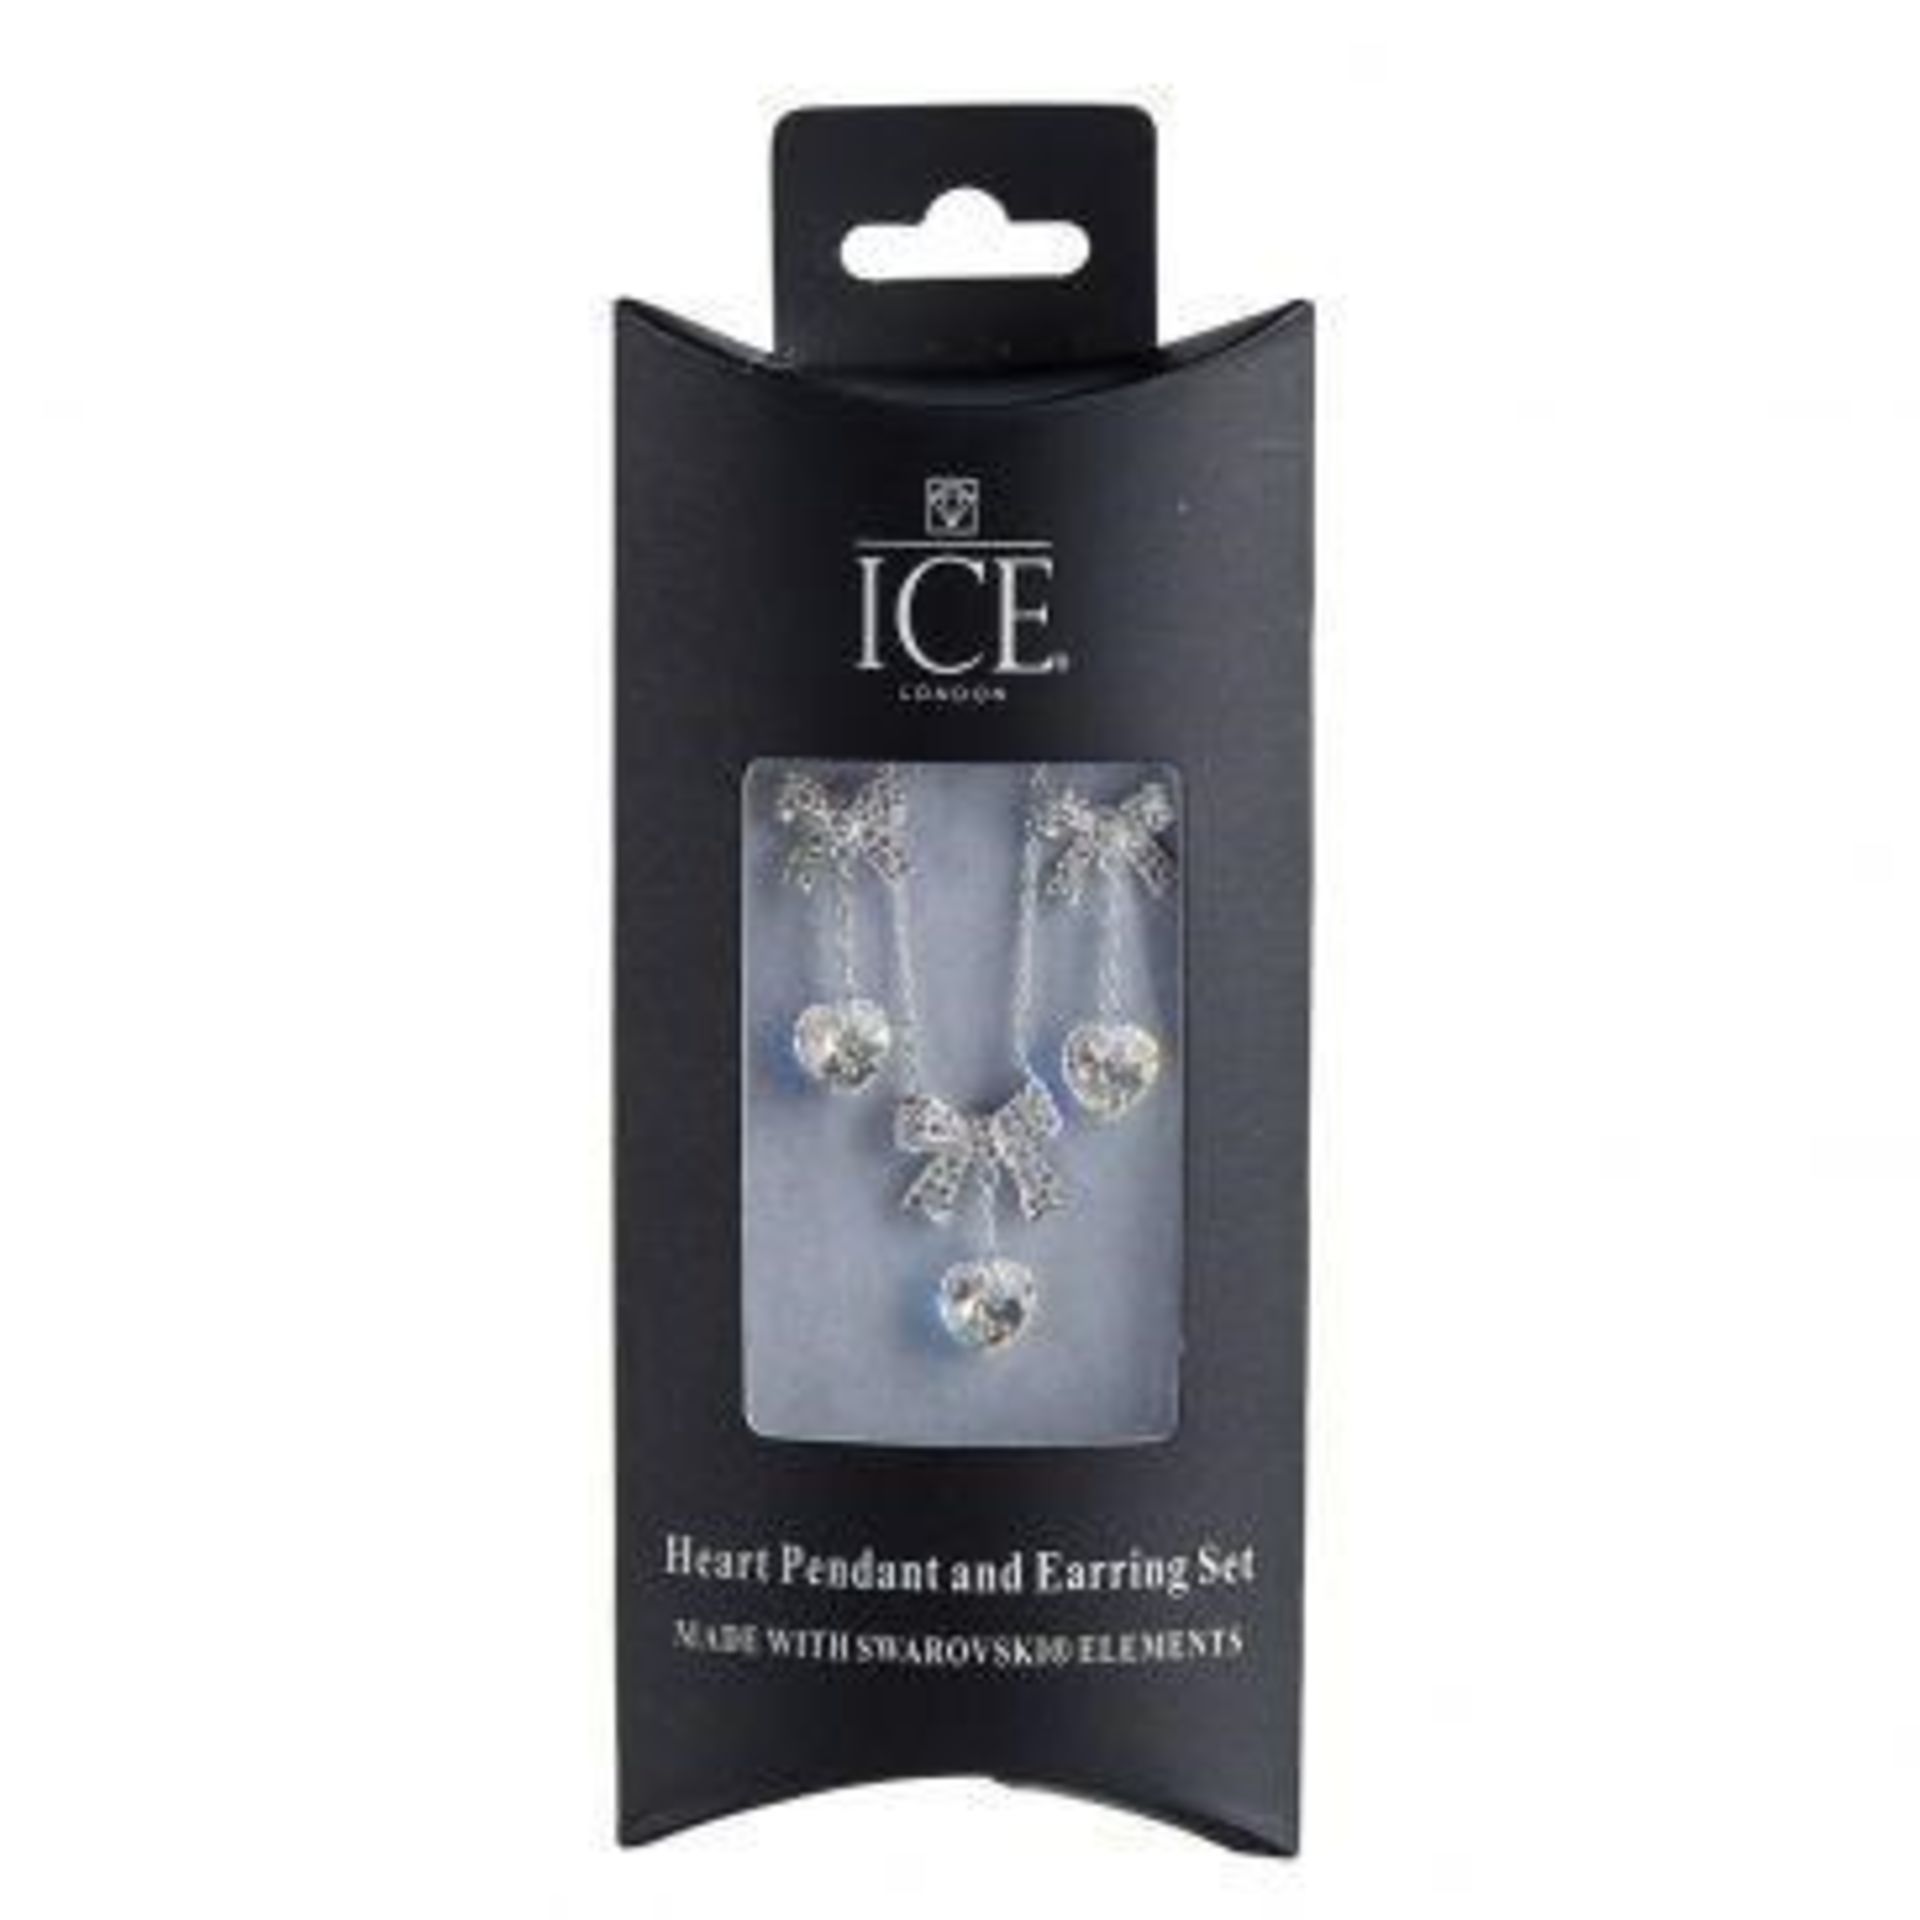 20 x HEART PENDANT AND EARRING SETS By ICE London - EGJ-9900 - Silver-tone Curb Chain Adorned With - Image 3 of 3